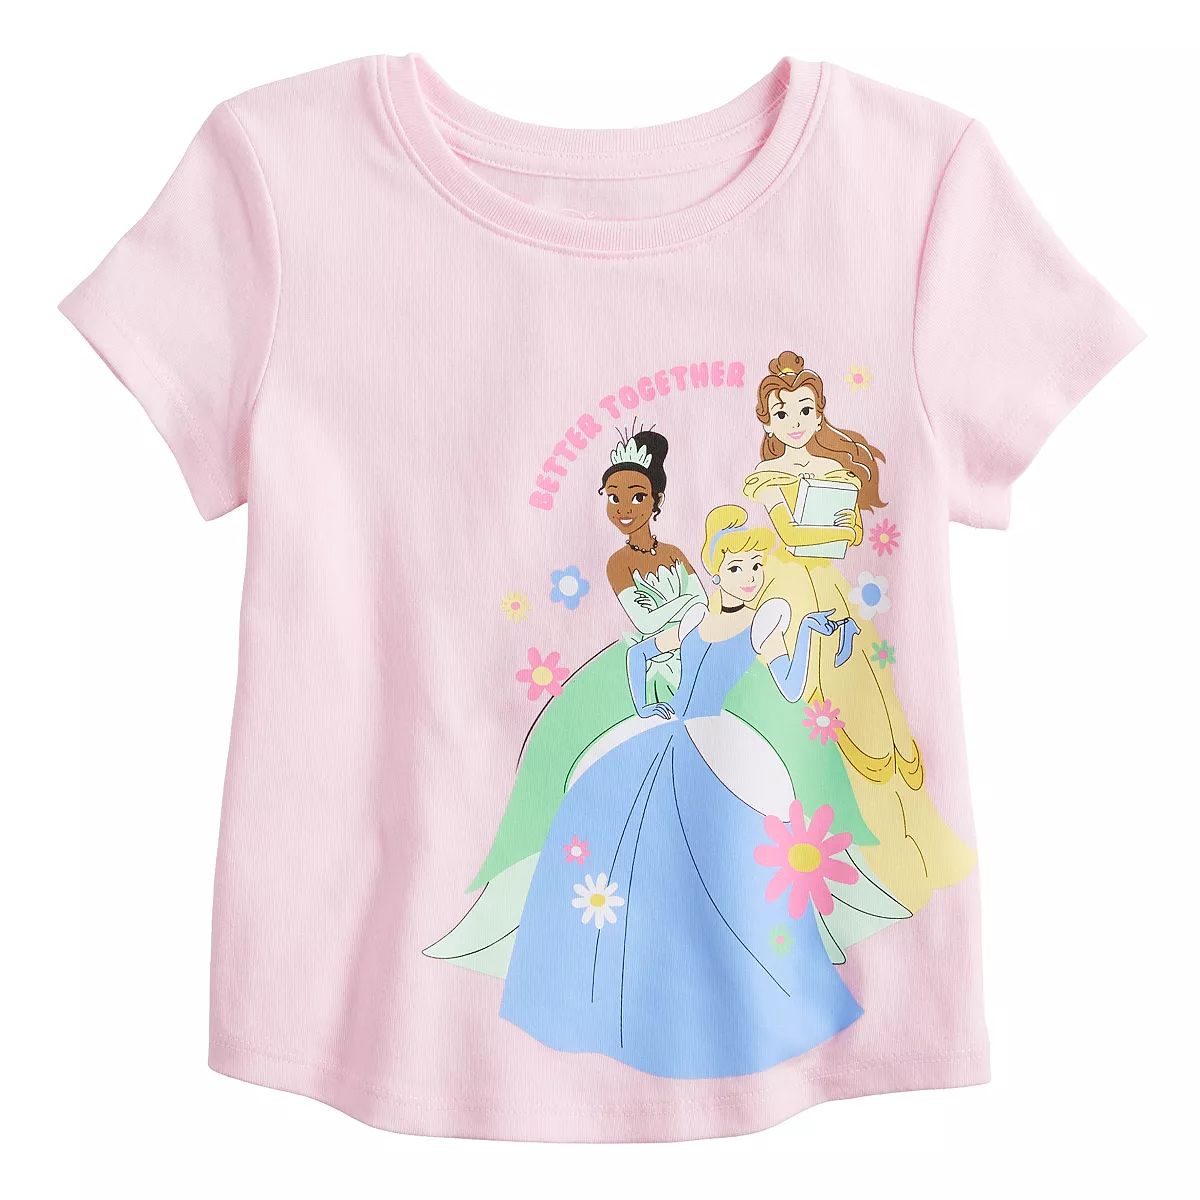 Disney Princesses Toddler Girl "Better Together" Graphic Tee by Jumping Beans® | Kohl's